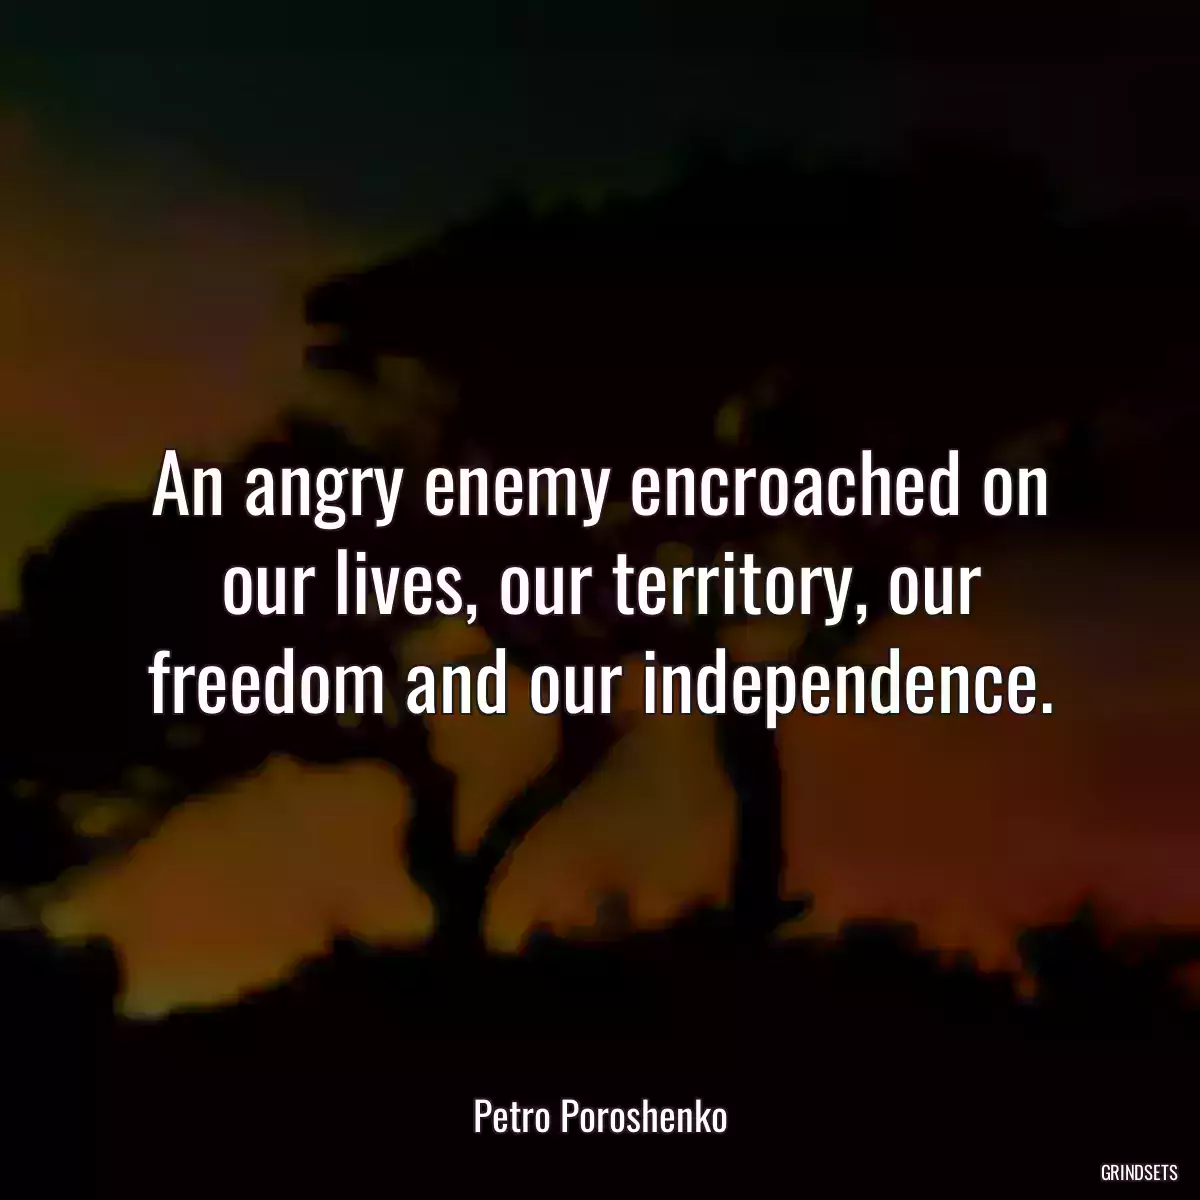 An angry enemy encroached on our lives, our territory, our freedom and our independence.